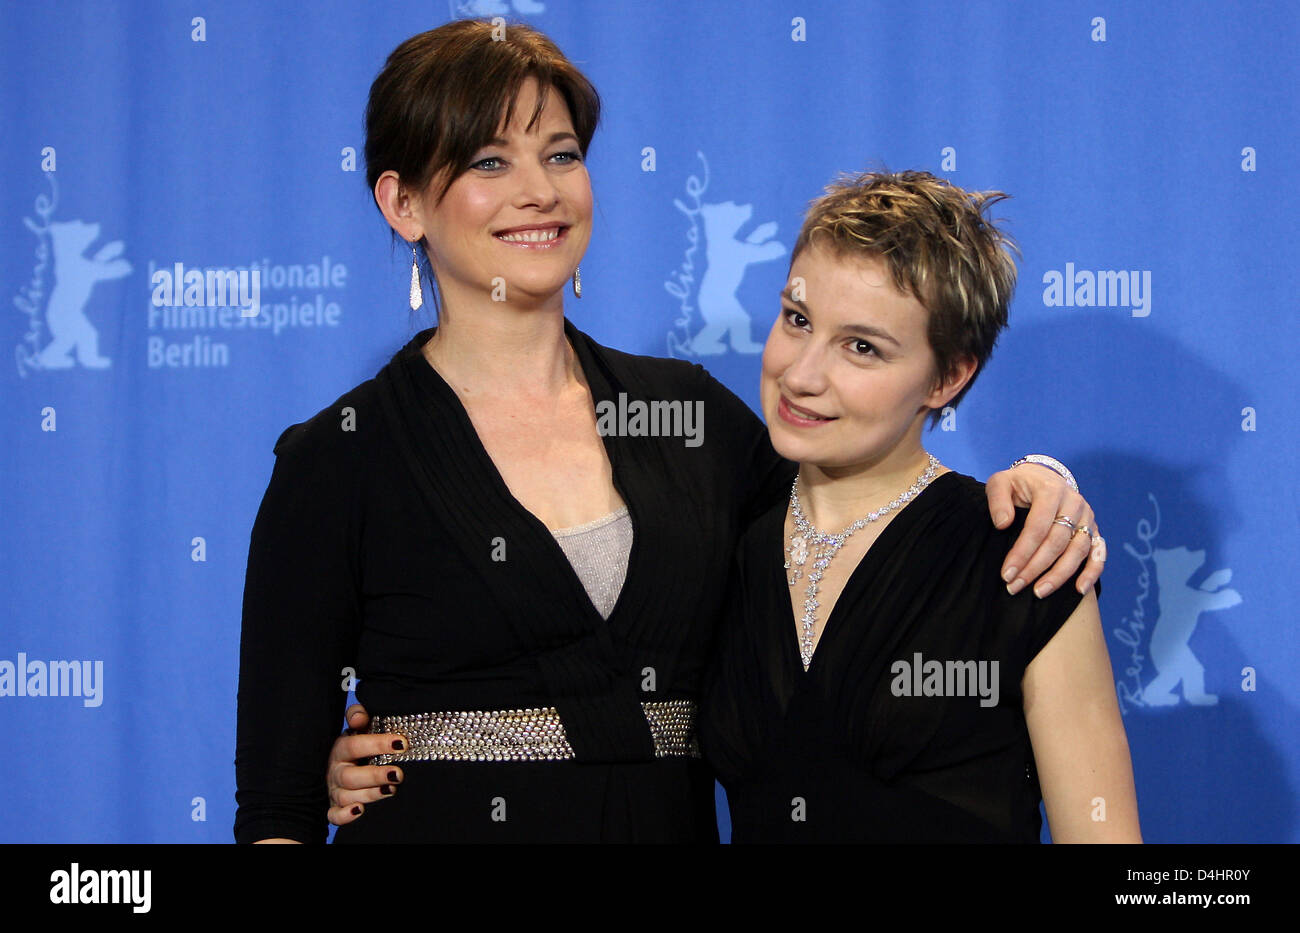 New Zealand actress Kerry Fox (L) and Romanian actress Anamaria Marinca pose at the photocall for their film ?Storm? at the 59th Berlin International Film Festival in Berlin, Germany, 07 February 2009. The film is one of 18 films to compete for the Silver and Golden Bears of the 59th Berlinale. Photo: ALINA NOVOPASHINA Stock Photo